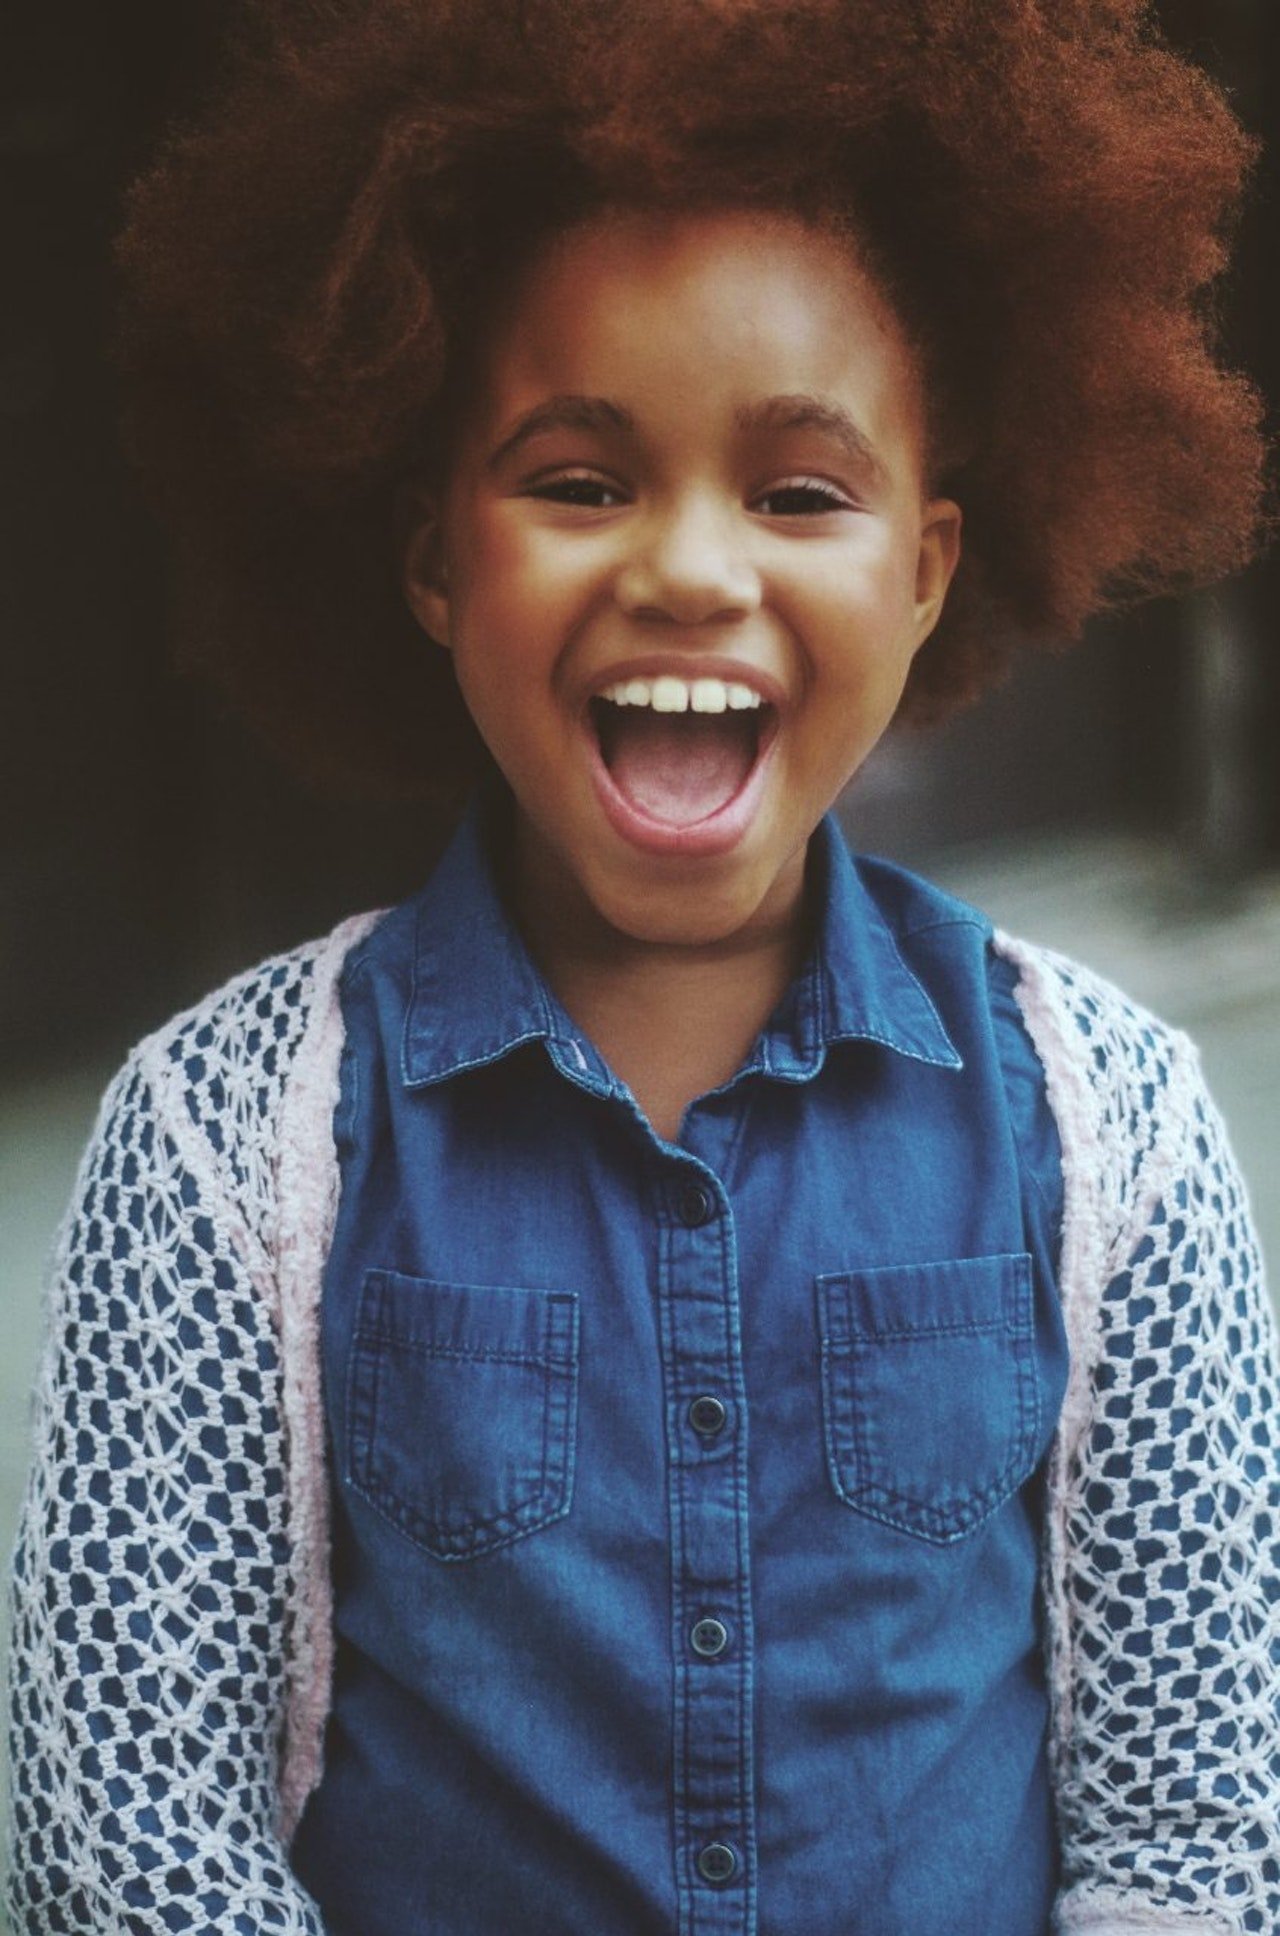 Photo of a young little girl | Photo: Pexels